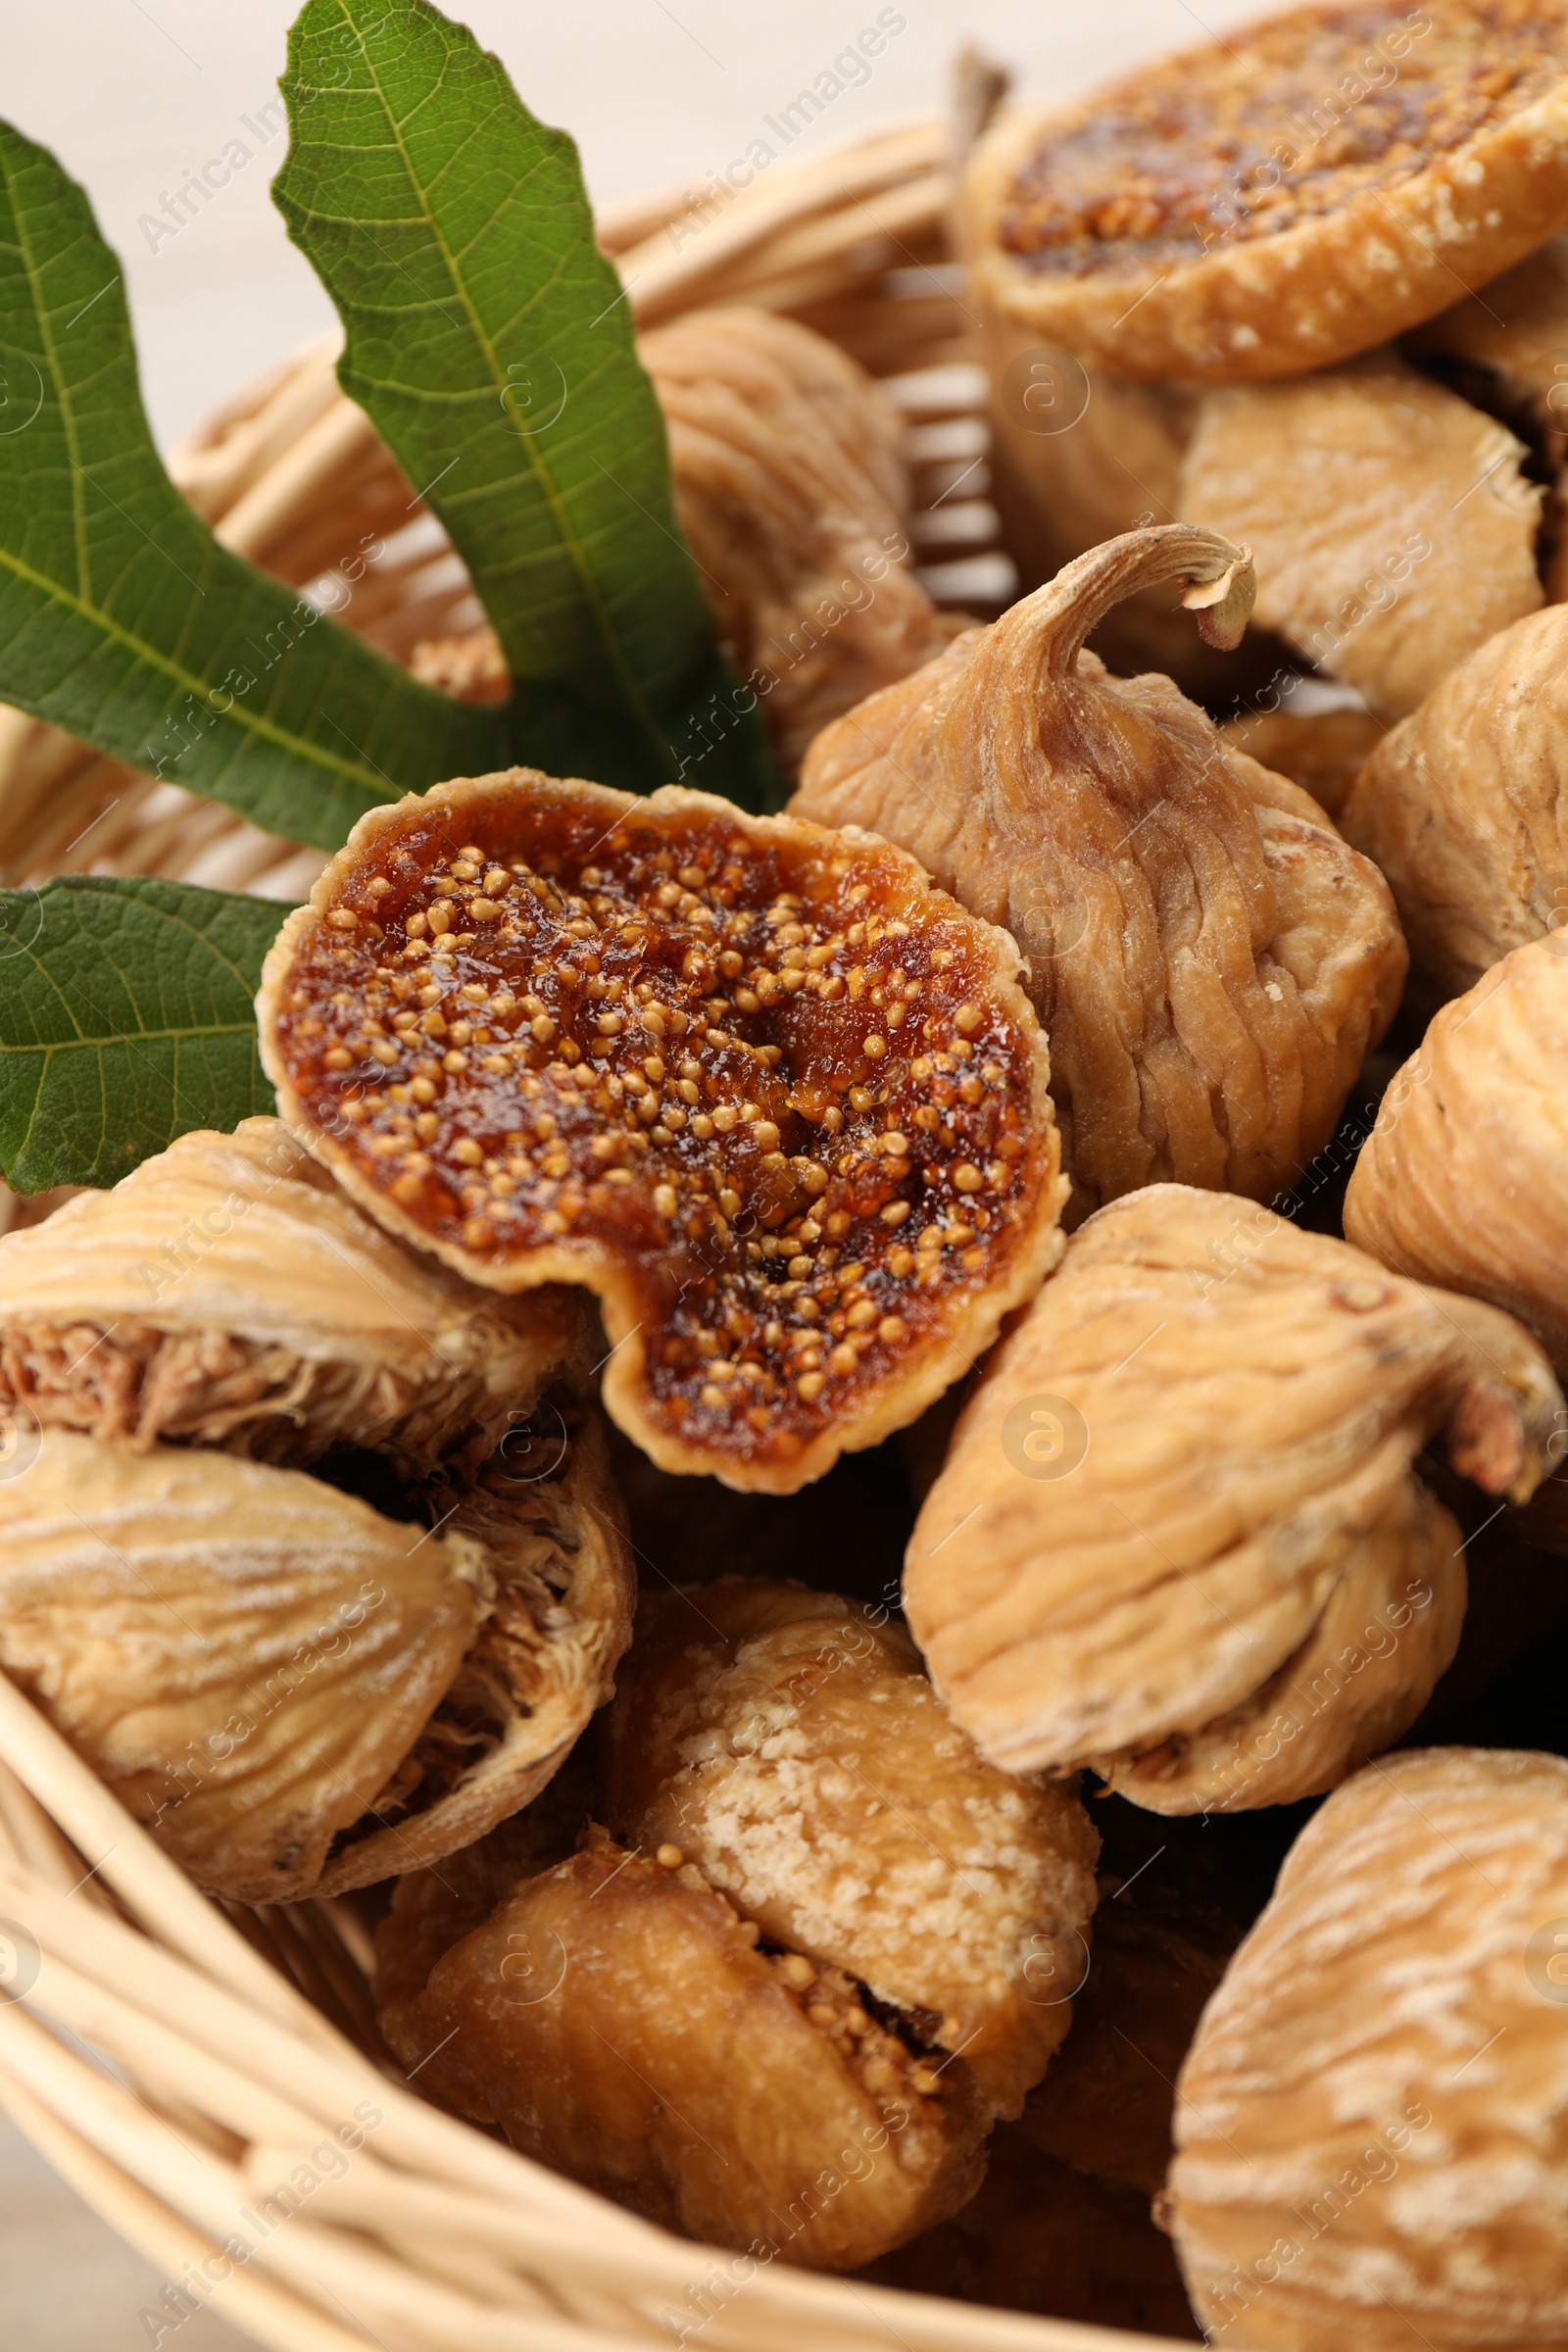 Photo of Wicker basket with tasty dried figs and green leaf on table, closeup